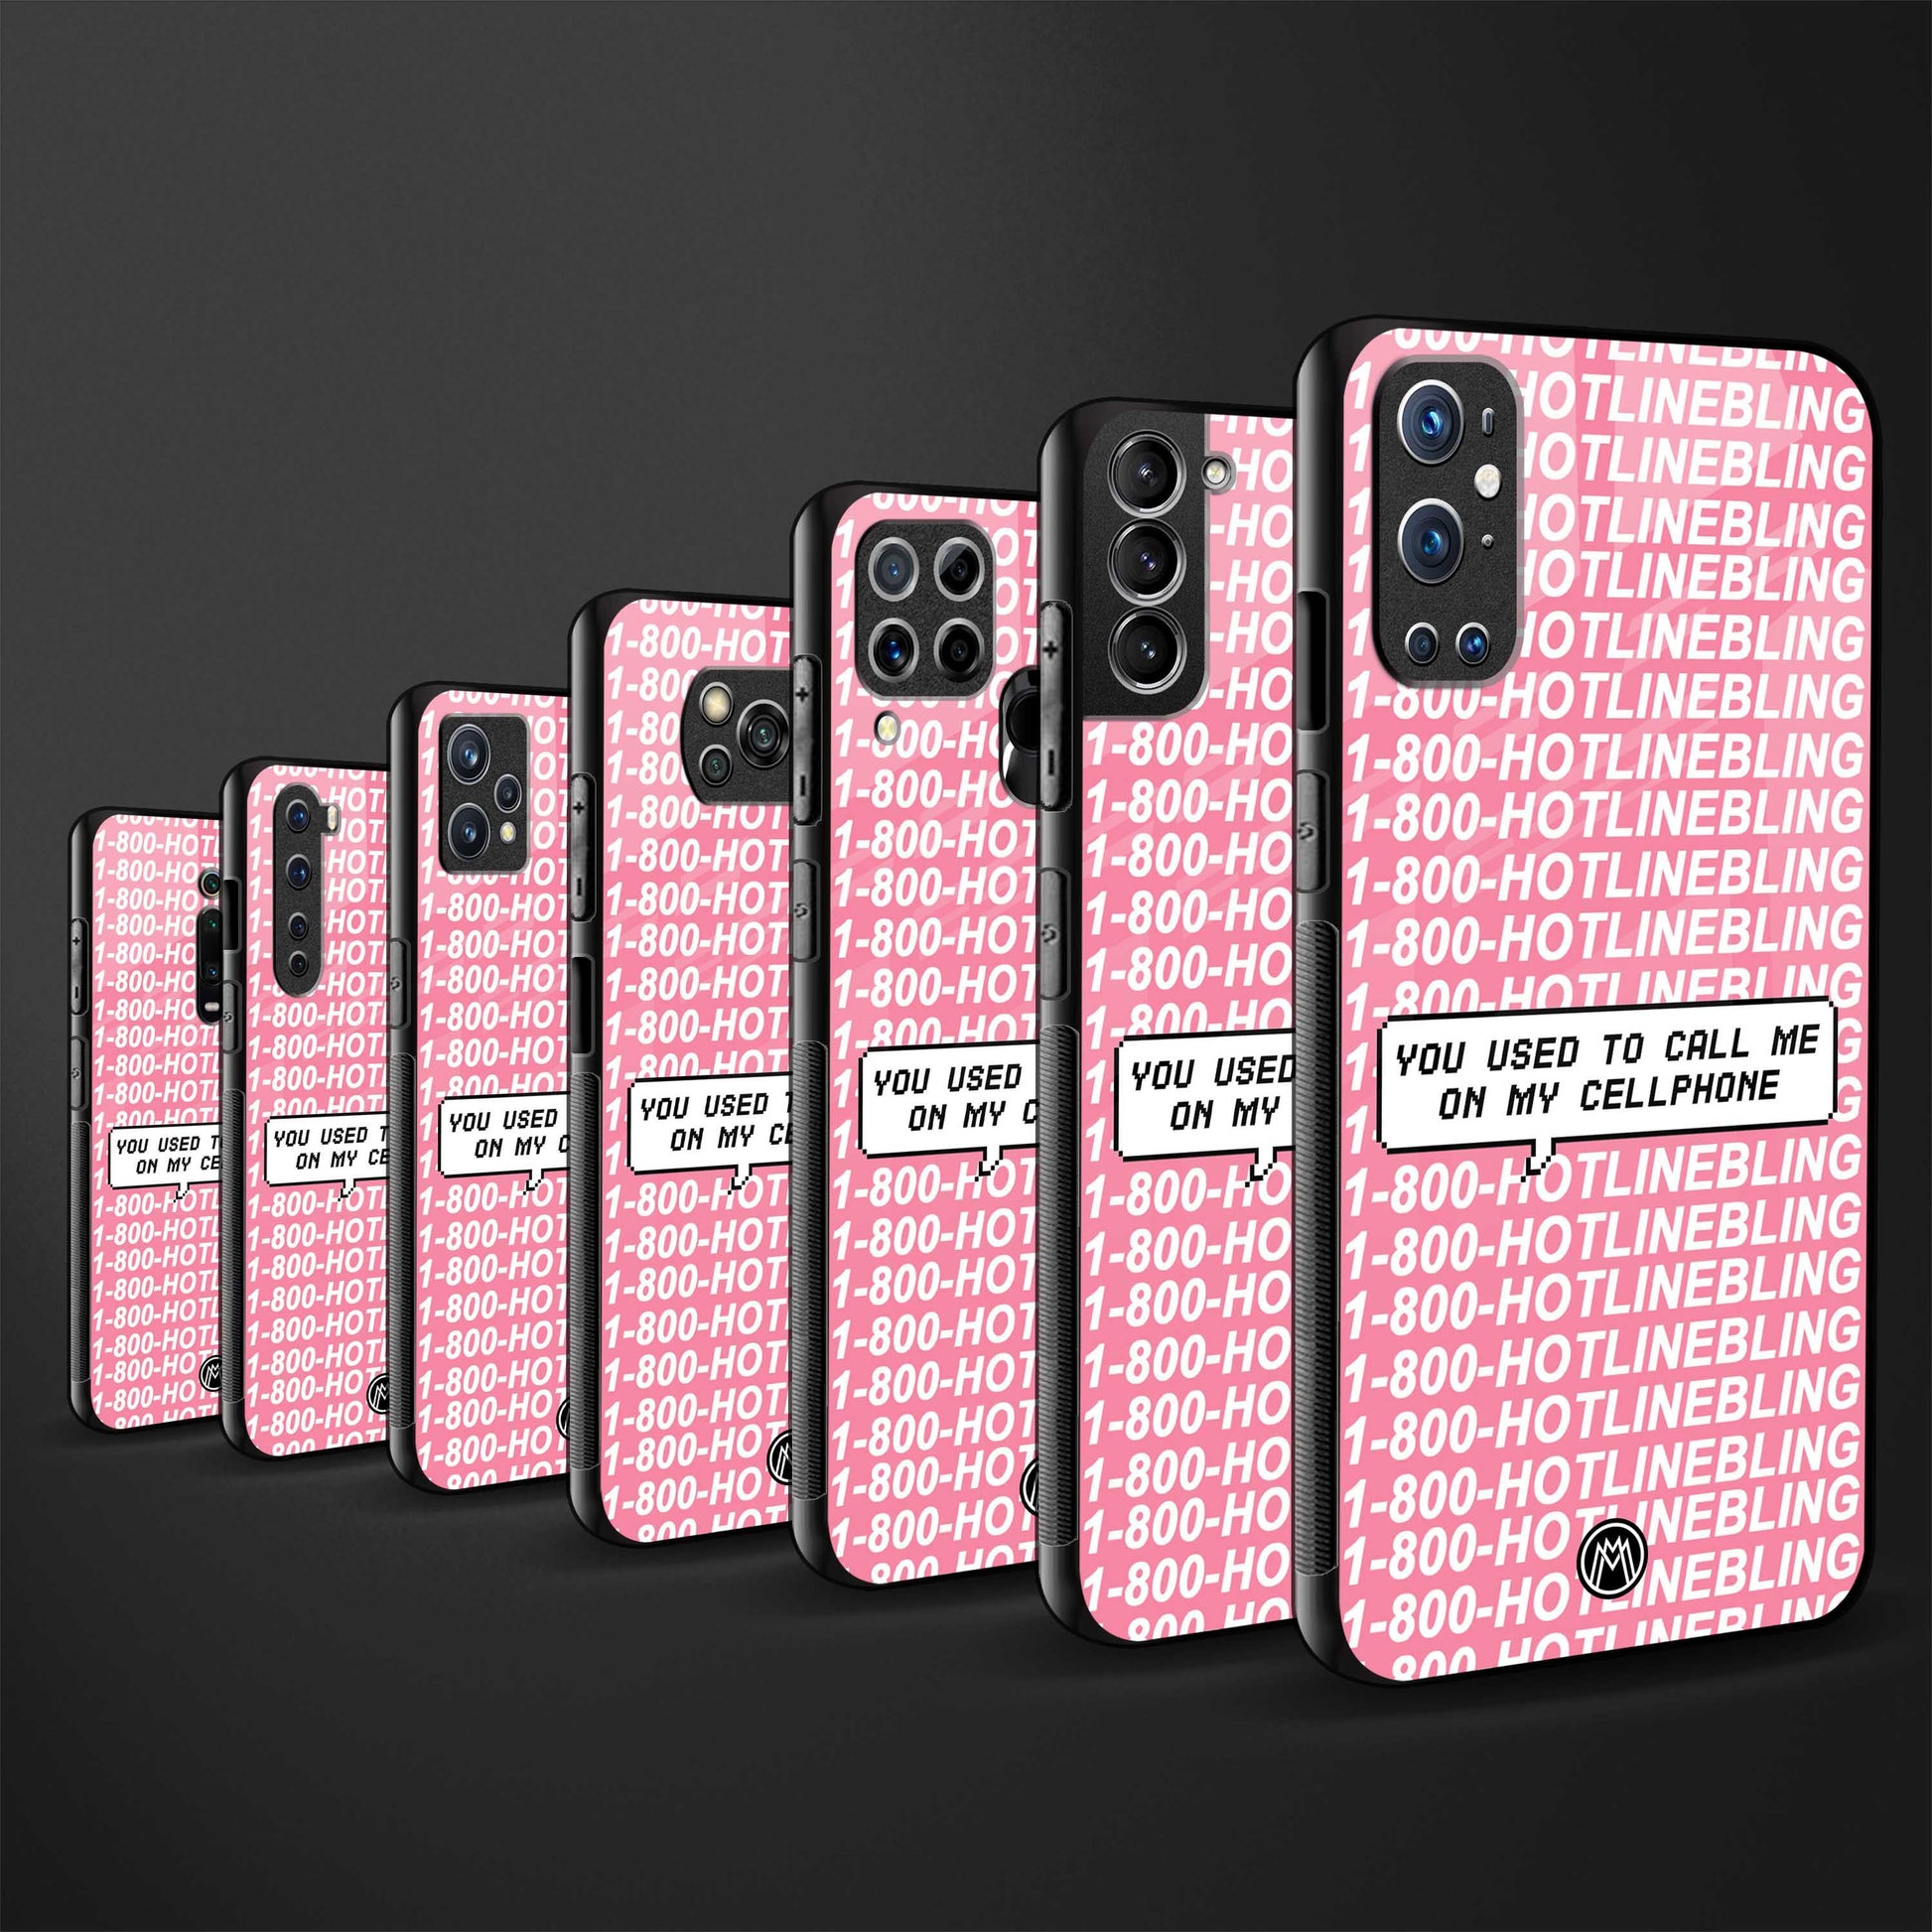 1800 hotline bling phone cover for redmi note 9 